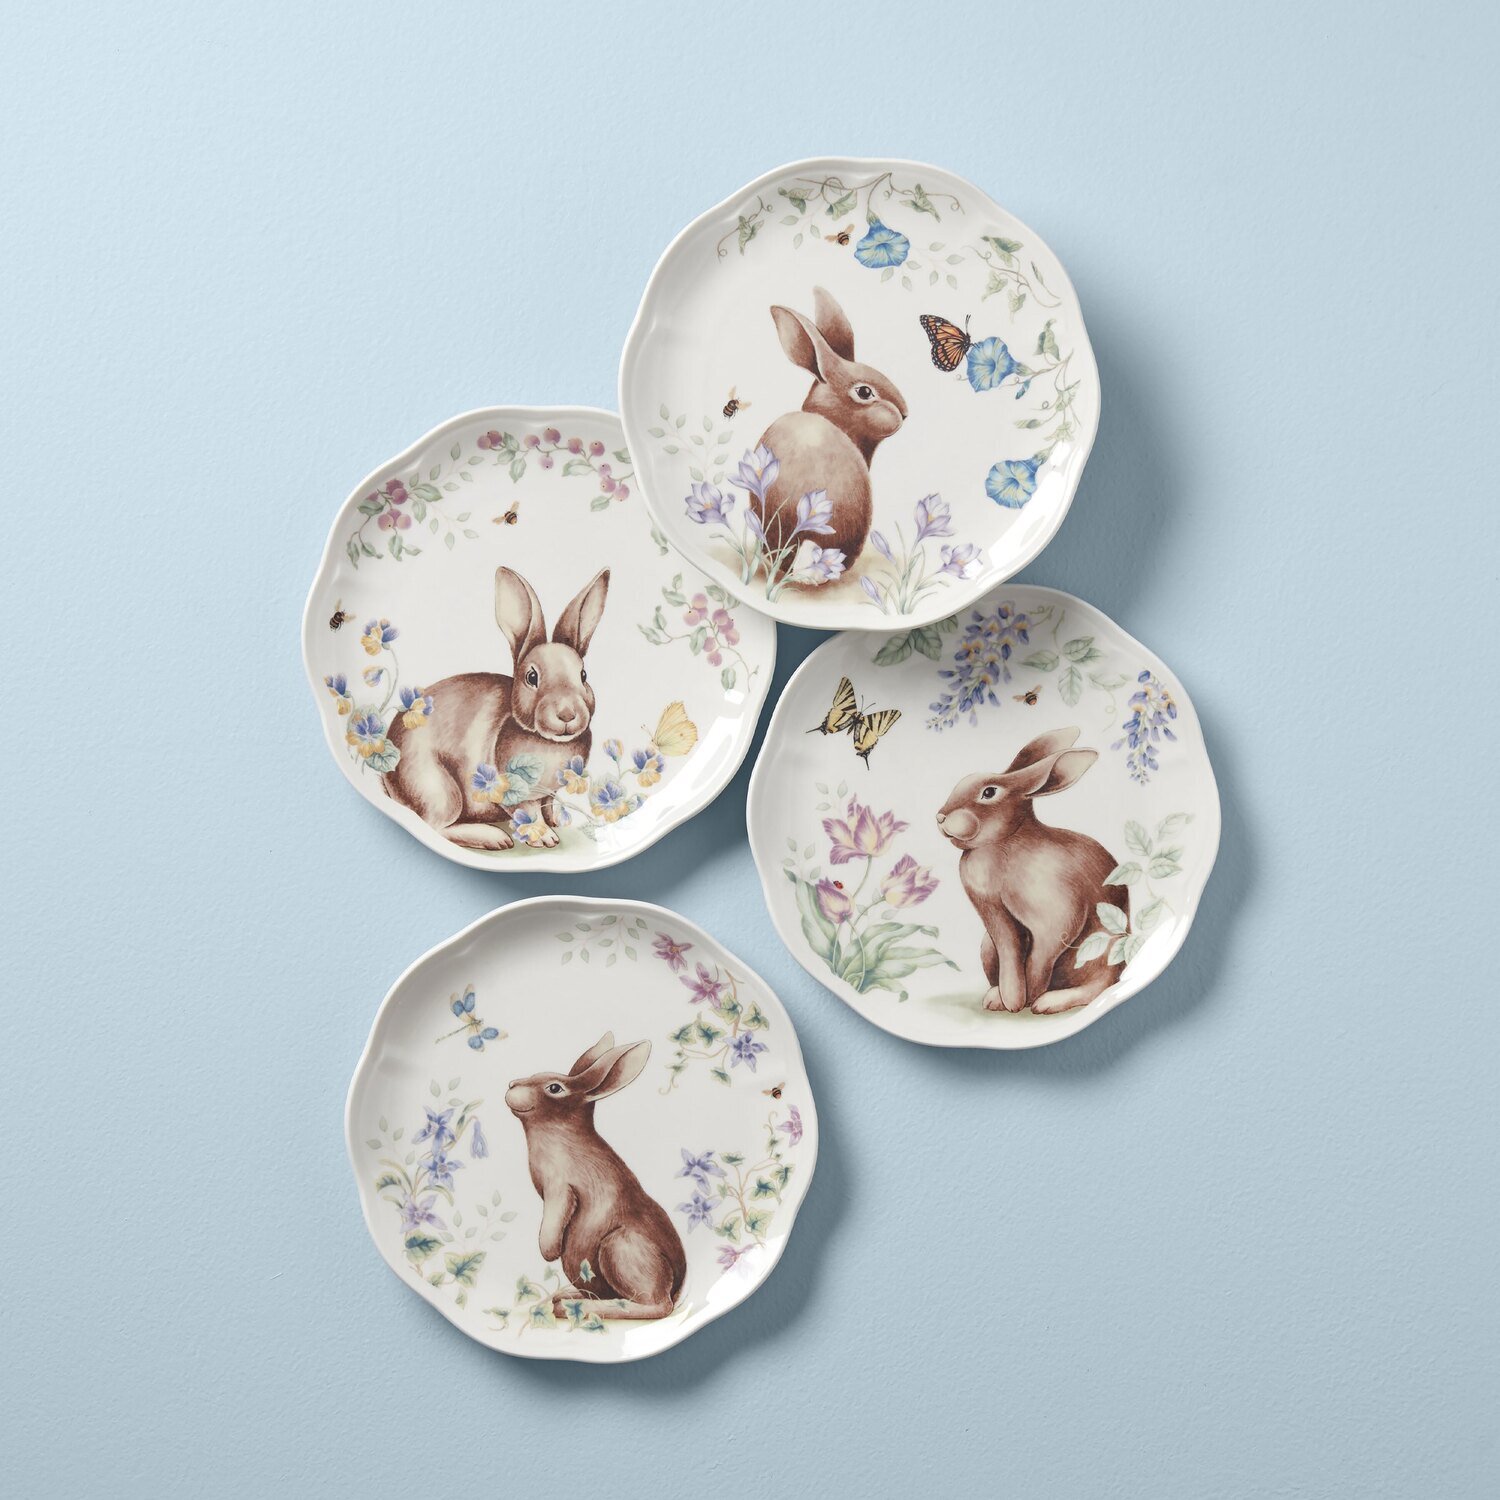 Lenox Butterfly Meadow Bunny Bunny Accent Plates Set of 4 Assorted 893465